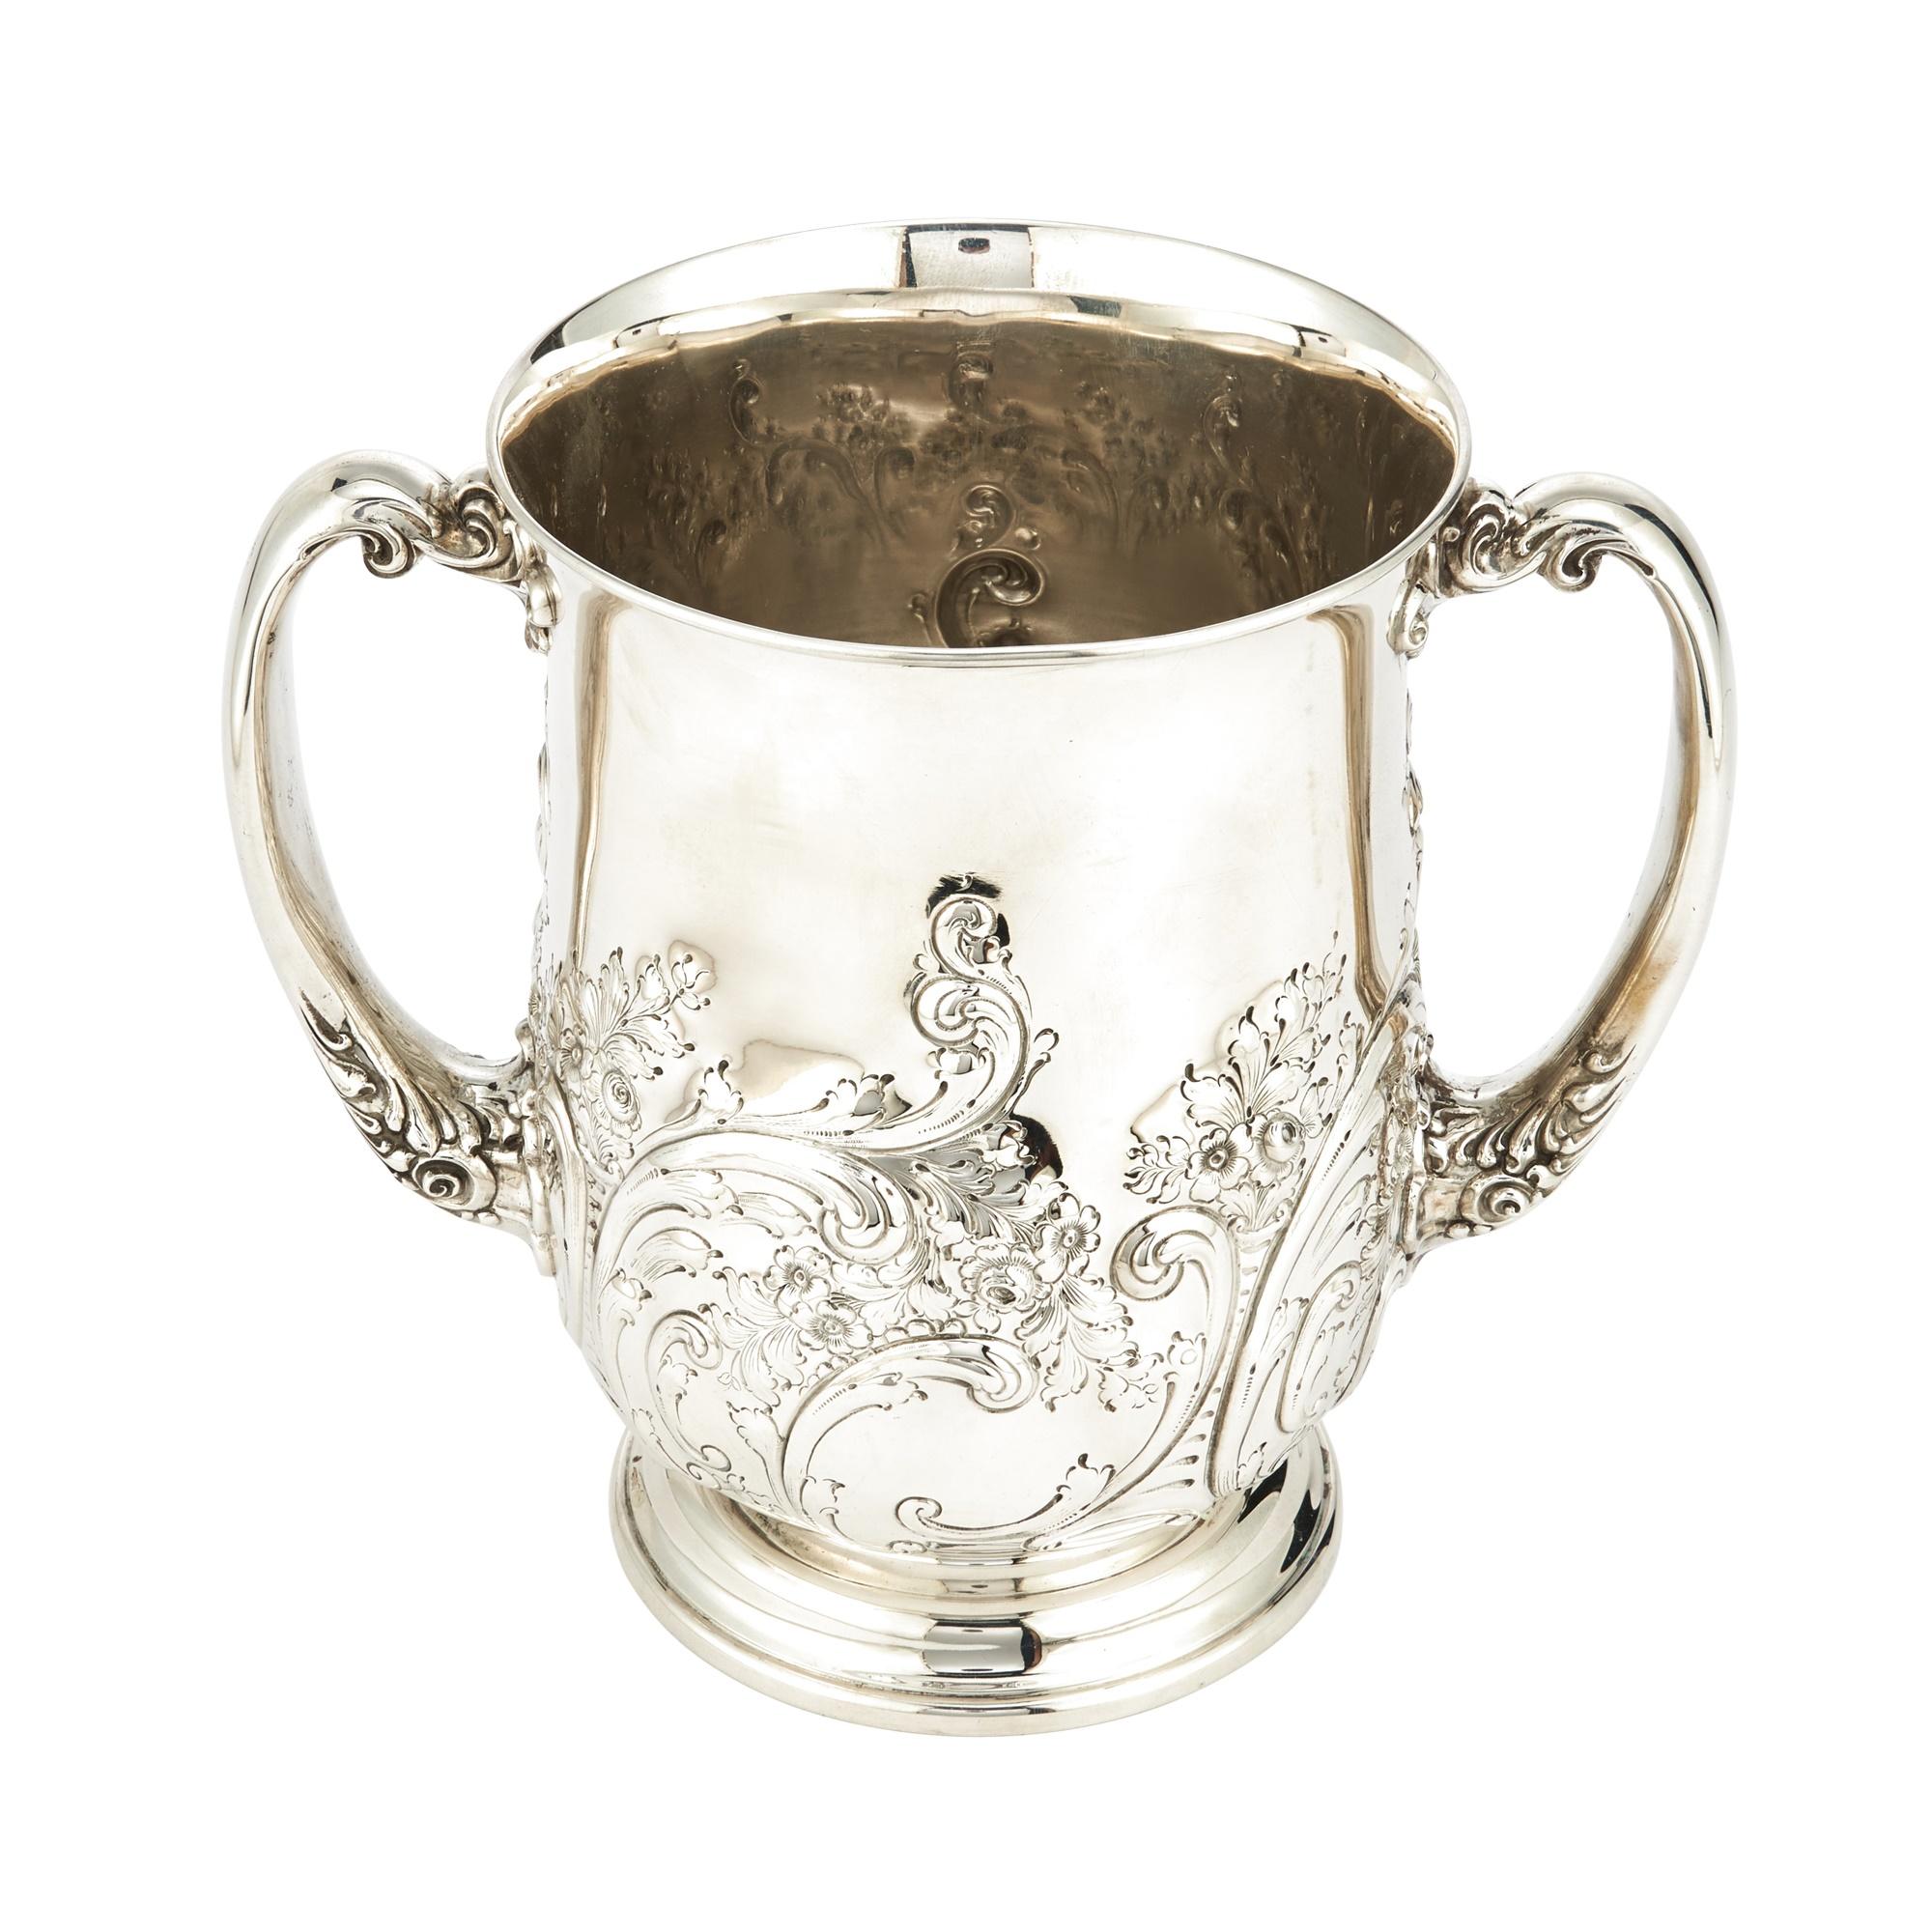 Introduce a touch of early 20th-century elegance to your collection with this sterling silver two-handled decorative piece/vase, crafted in the United States by Richards M Woods & Co. The piece boasts a luxurious gold-washed interior, adding a touch